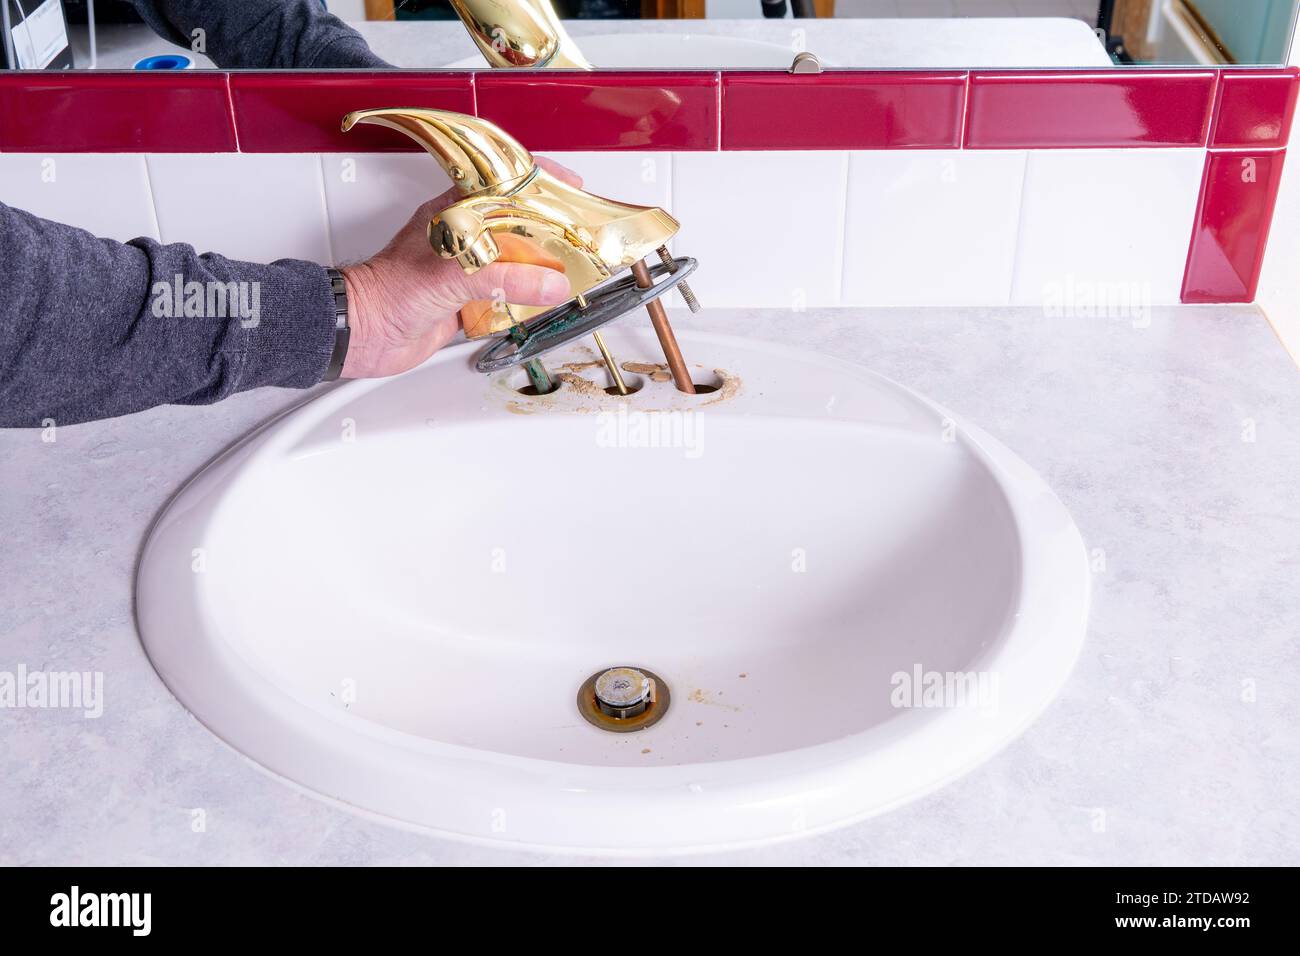 Gold colored sink faucet pulled from sink Stock Photo